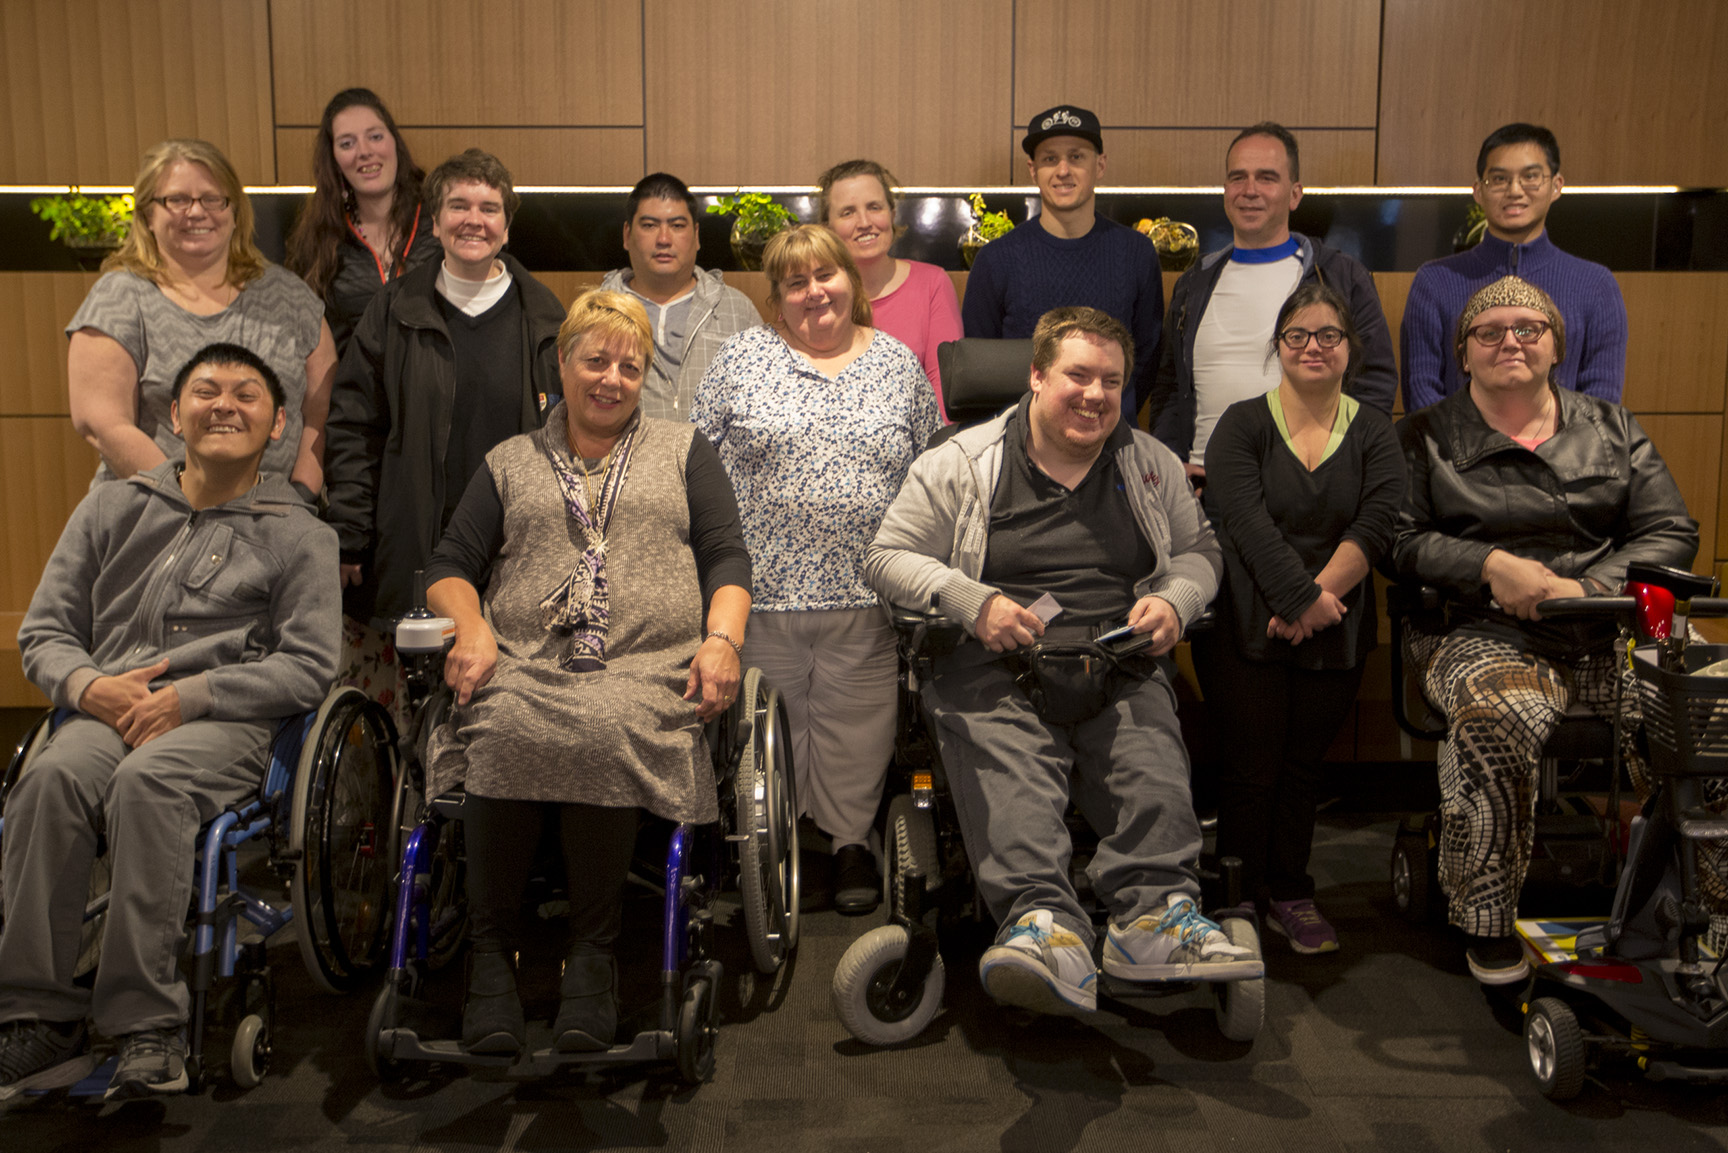 Photo of a group of 14 people in the lunch room at a hotel. They are in front a wood panel wall. There is dark grey carpet in the foreground. The NDIS Champions are smiling and appear relieved after a long day of training.